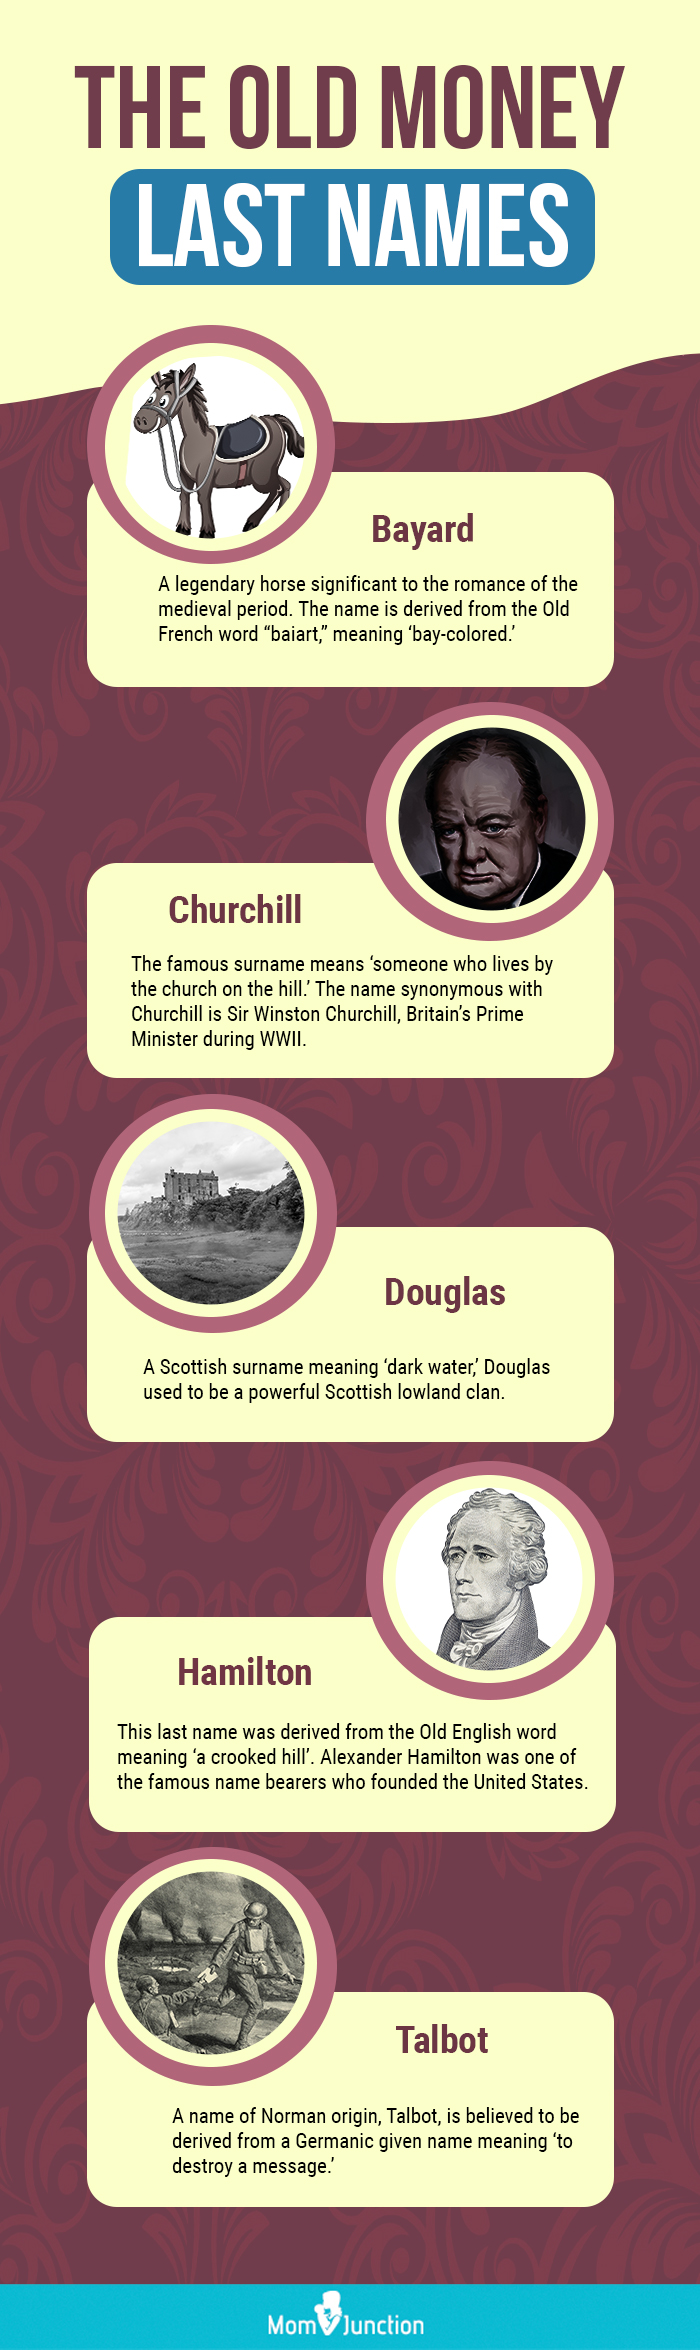 the old money last names (infographic)